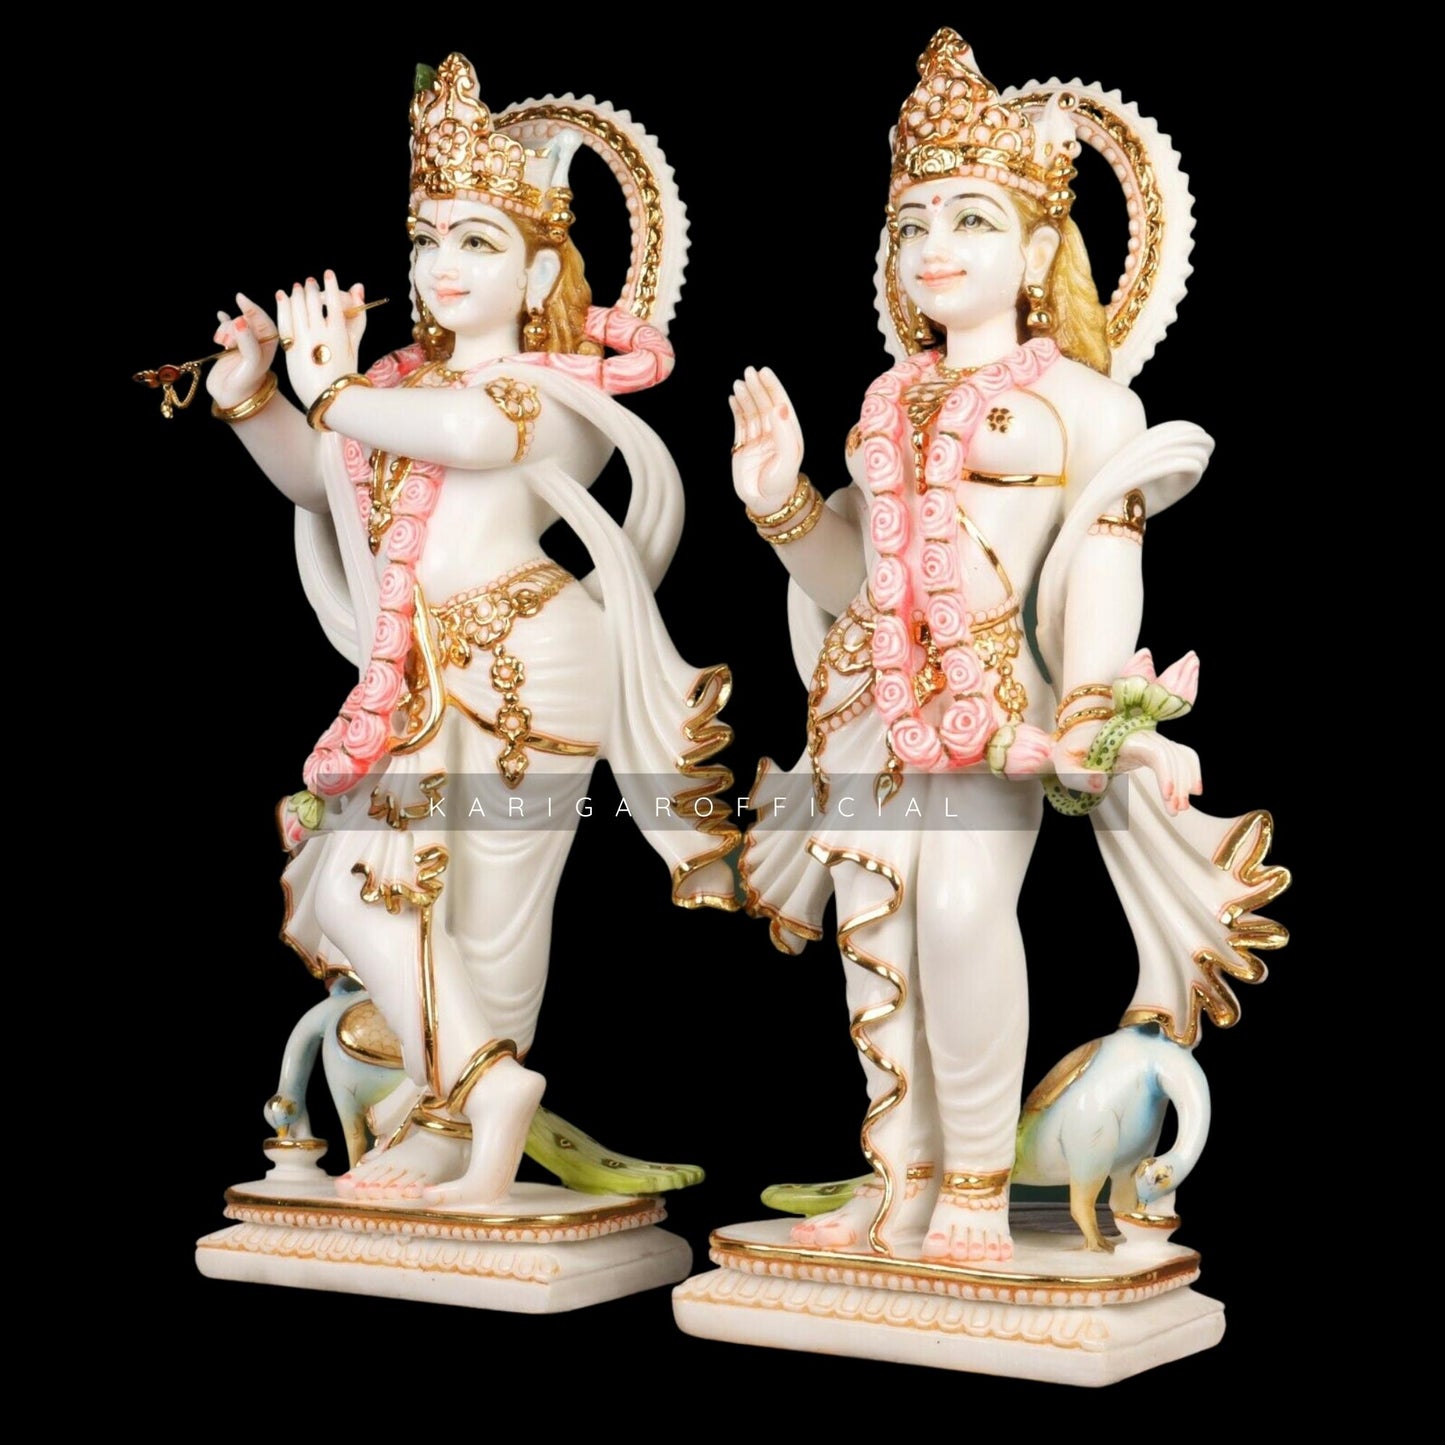 Radha Krishna Statue Standing With Peacock, Large 24 inches Murti in Royal Gold Leaf Work, White Golden Pink Accents Marble RadhaKrishna idol, Hindu Divine Couple Home Temple Wedding Housewarming Gift